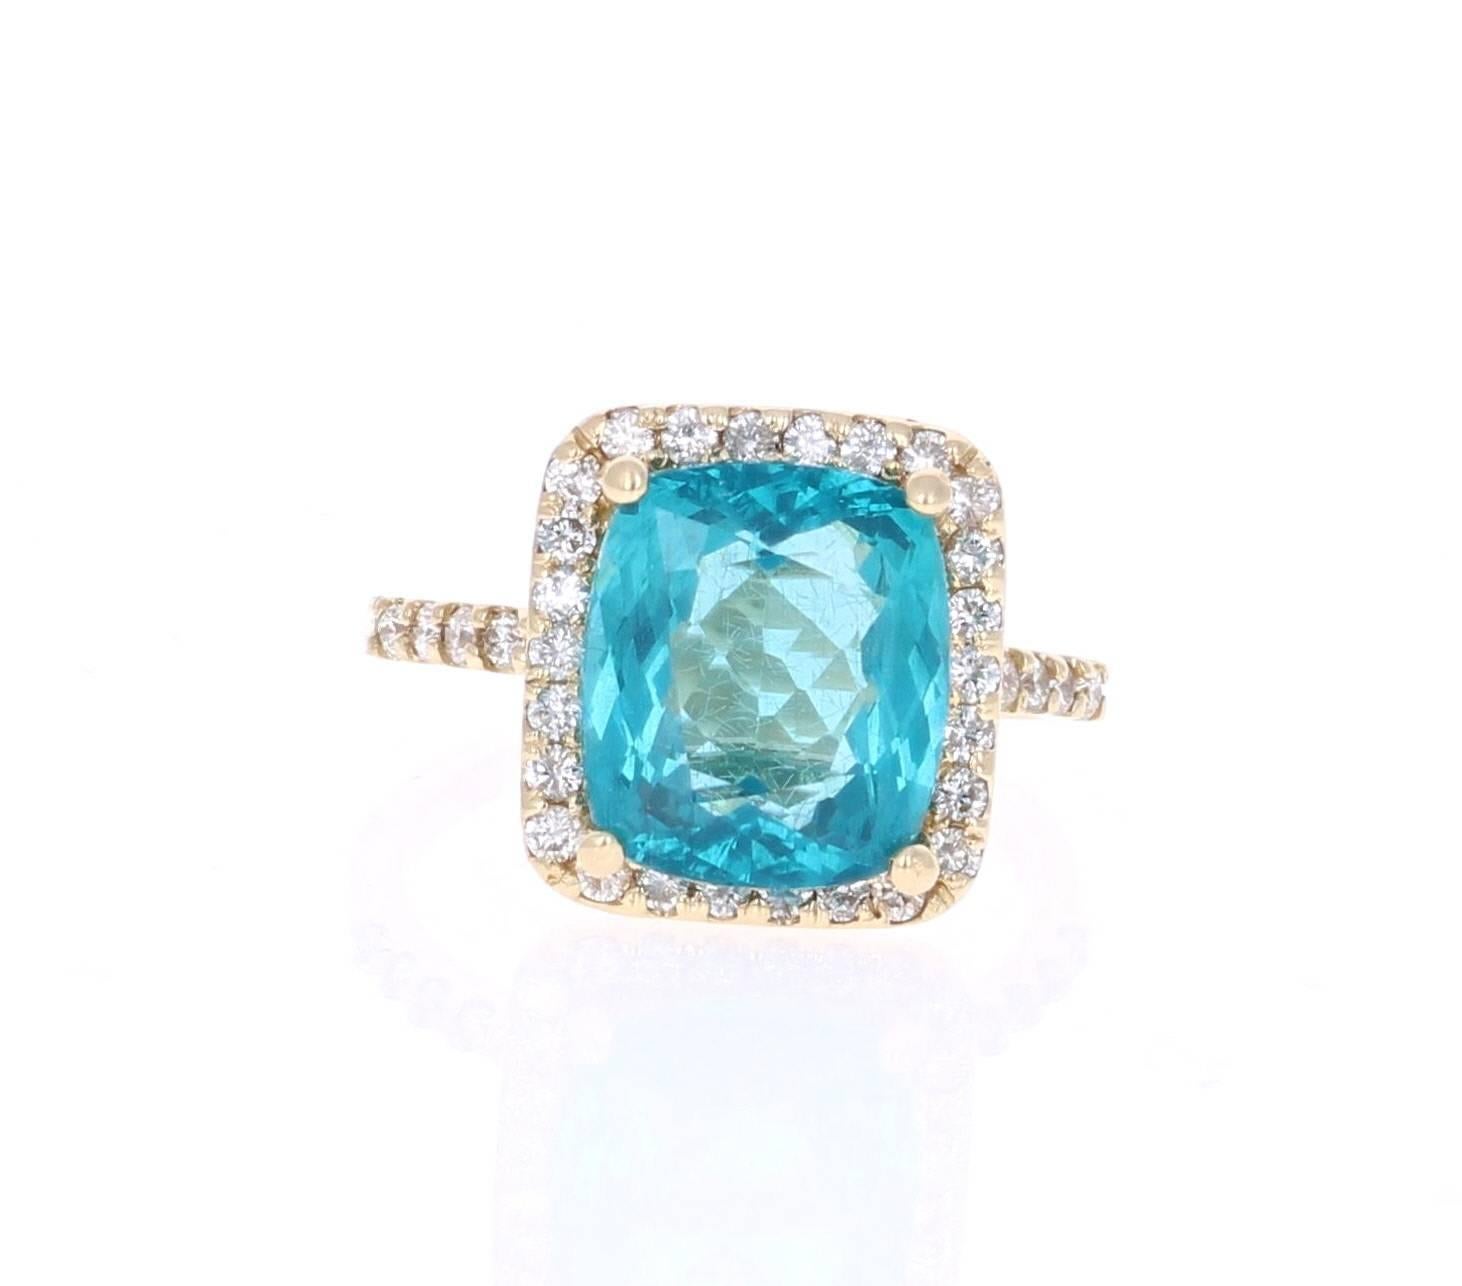 Classic and beautifully designed Apatite and Diamond Ring!  This ring has a 5.64 carat Apatite in the center of the ring and is surrounded by 38 Round Cut Diamonds that weigh a total of 0.62 carats. The total carat weight of the ring is 6.26 carats.